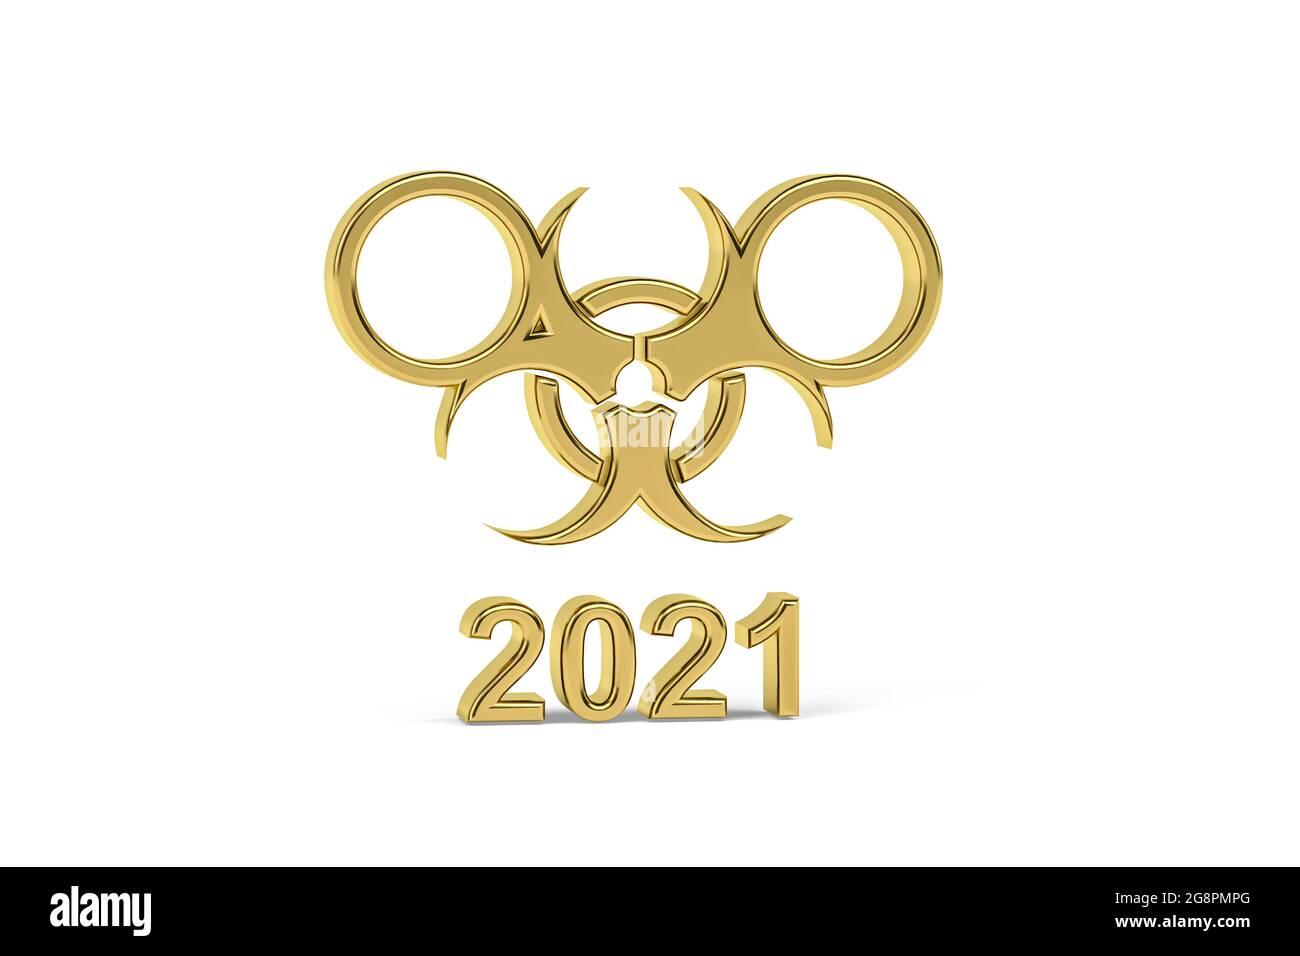 Golden 3d olympics icon isolated on white background - 3d render Stock Photo